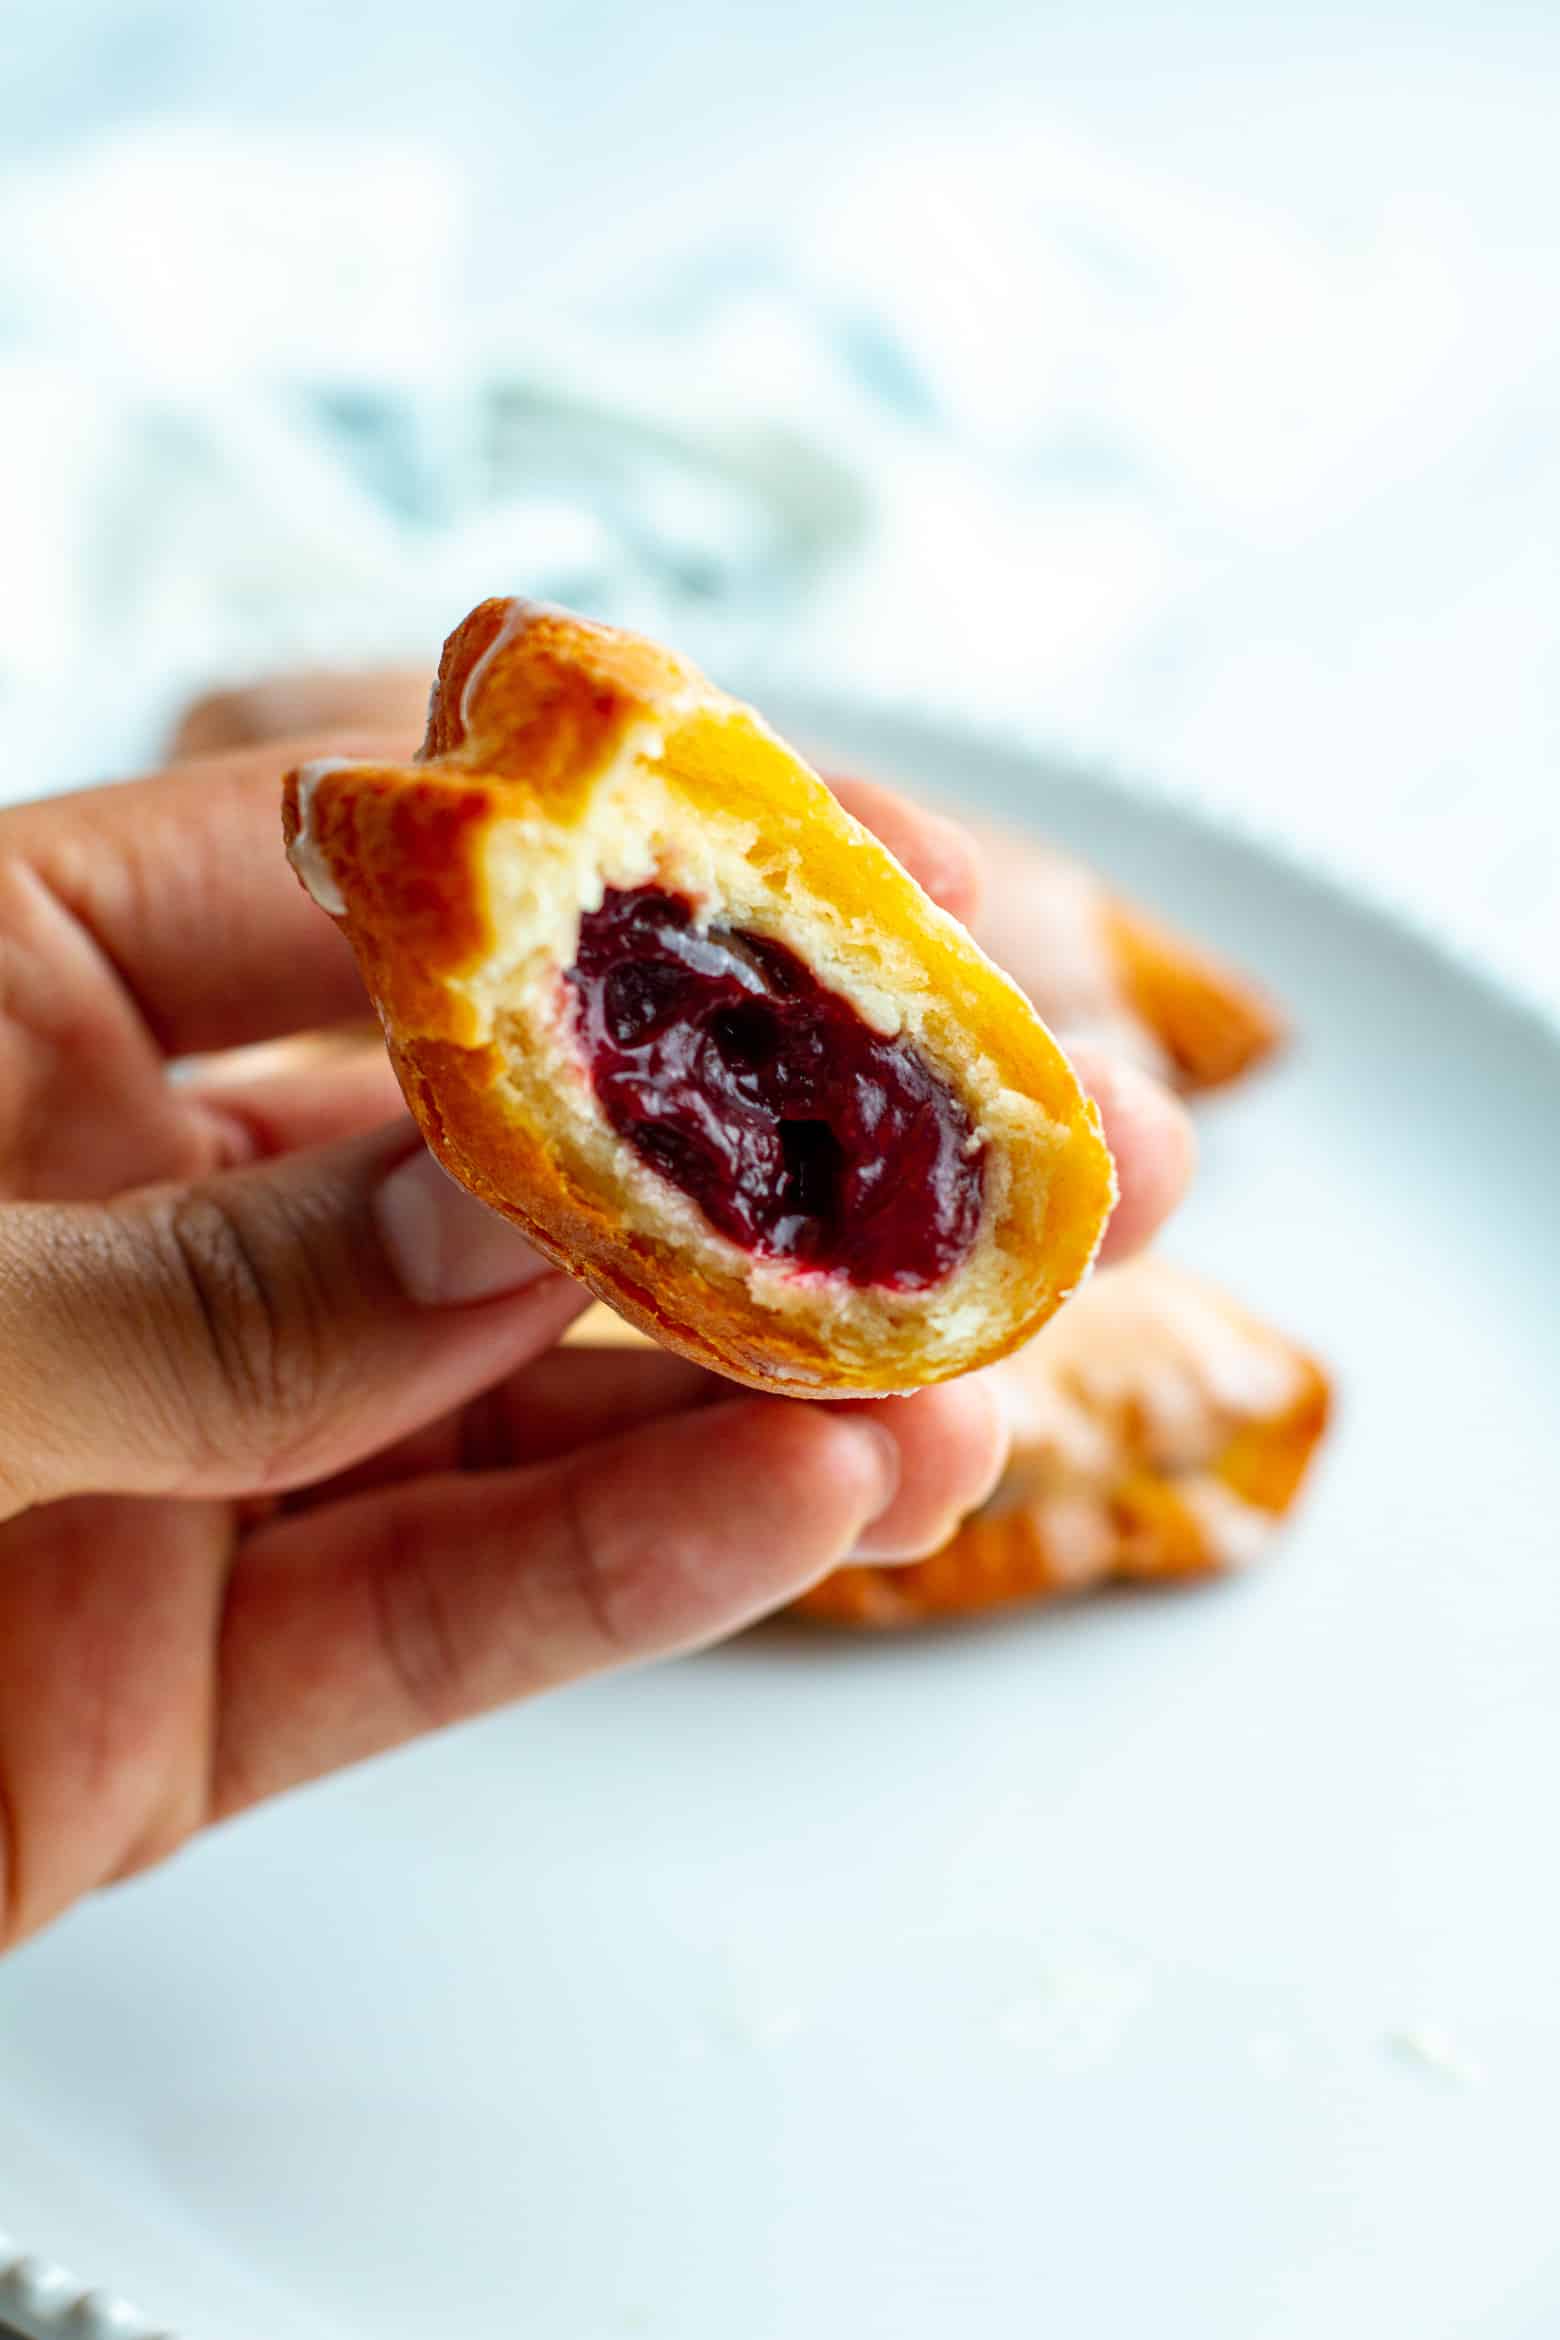 Cherry Fried Pie with a bite taken out being held in a hand.